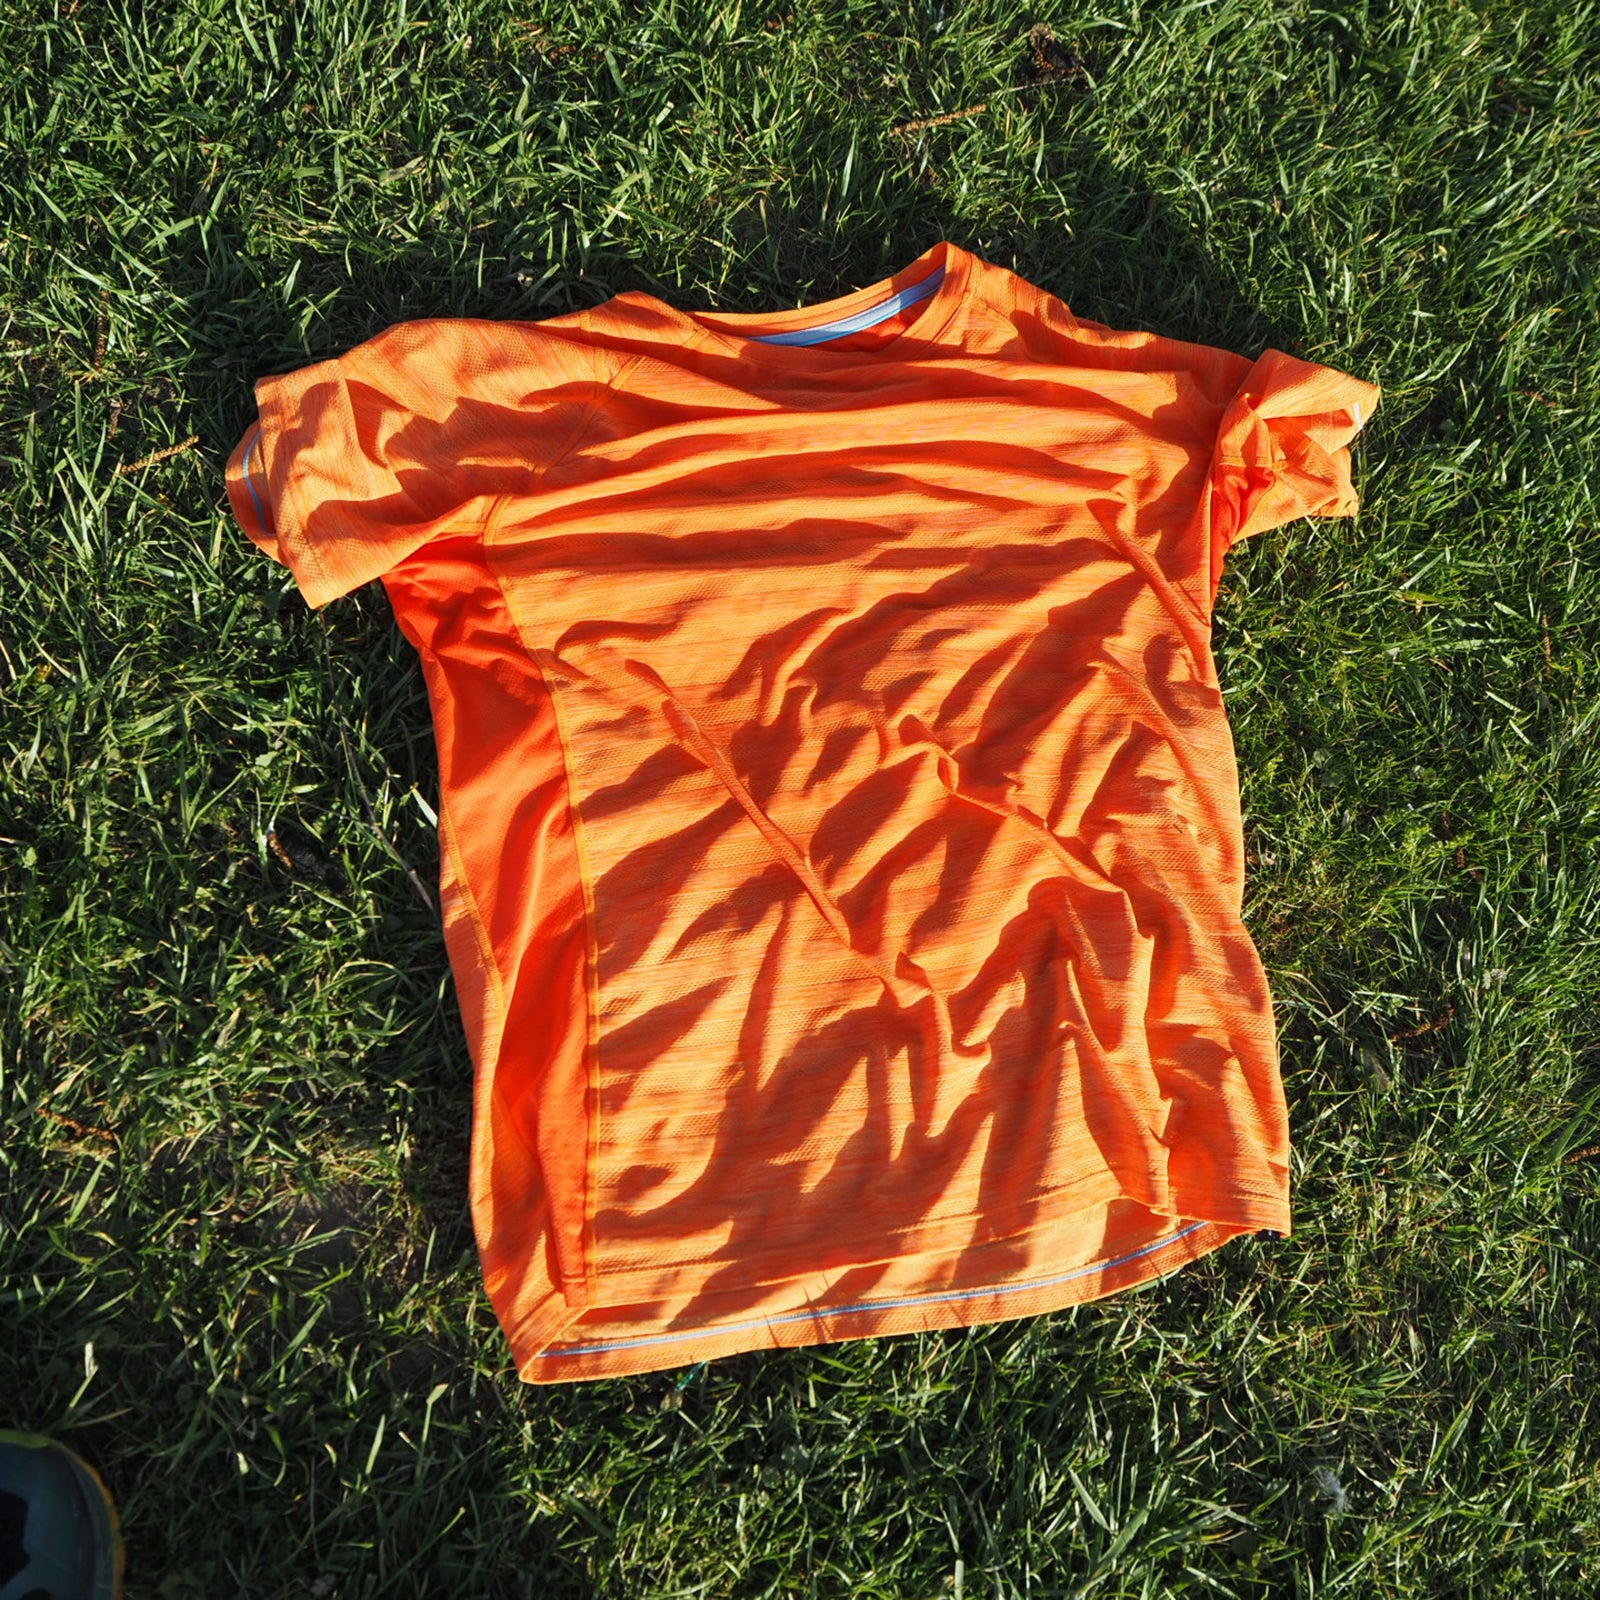 What is a wicking T-shirt? 